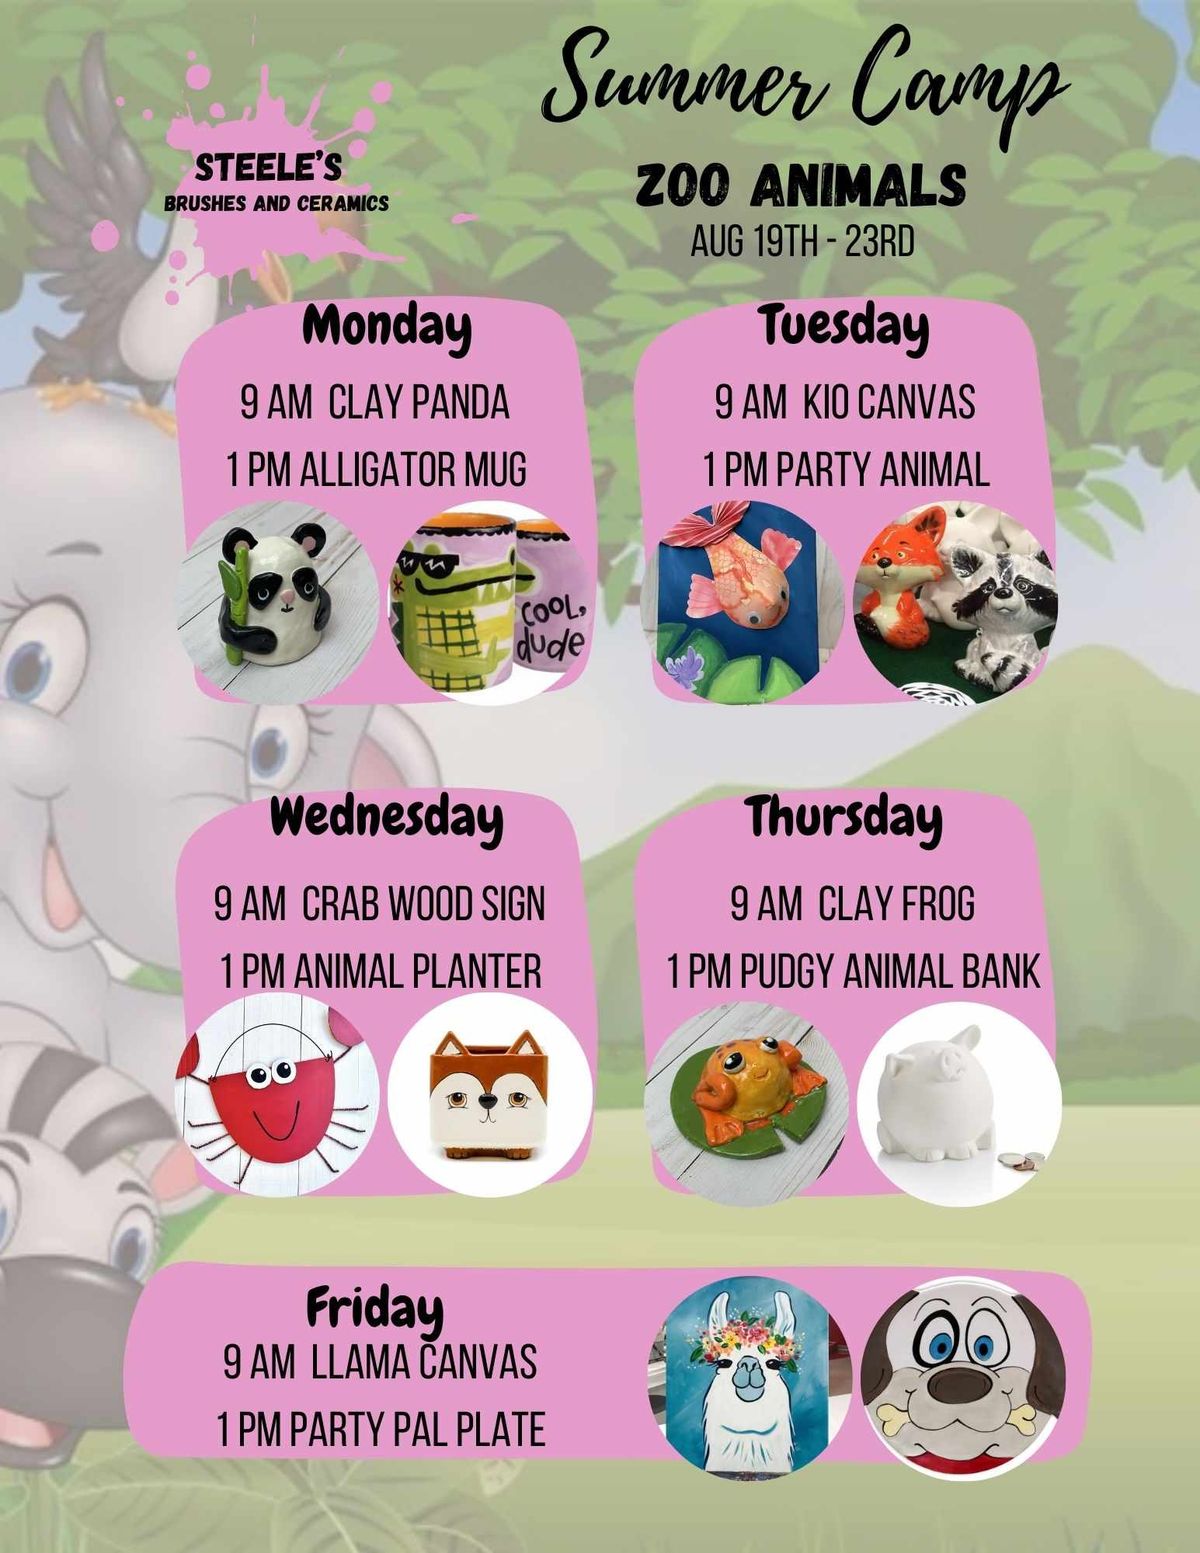 Summer Camp: Zoo Animals Aug 19th - 23rd